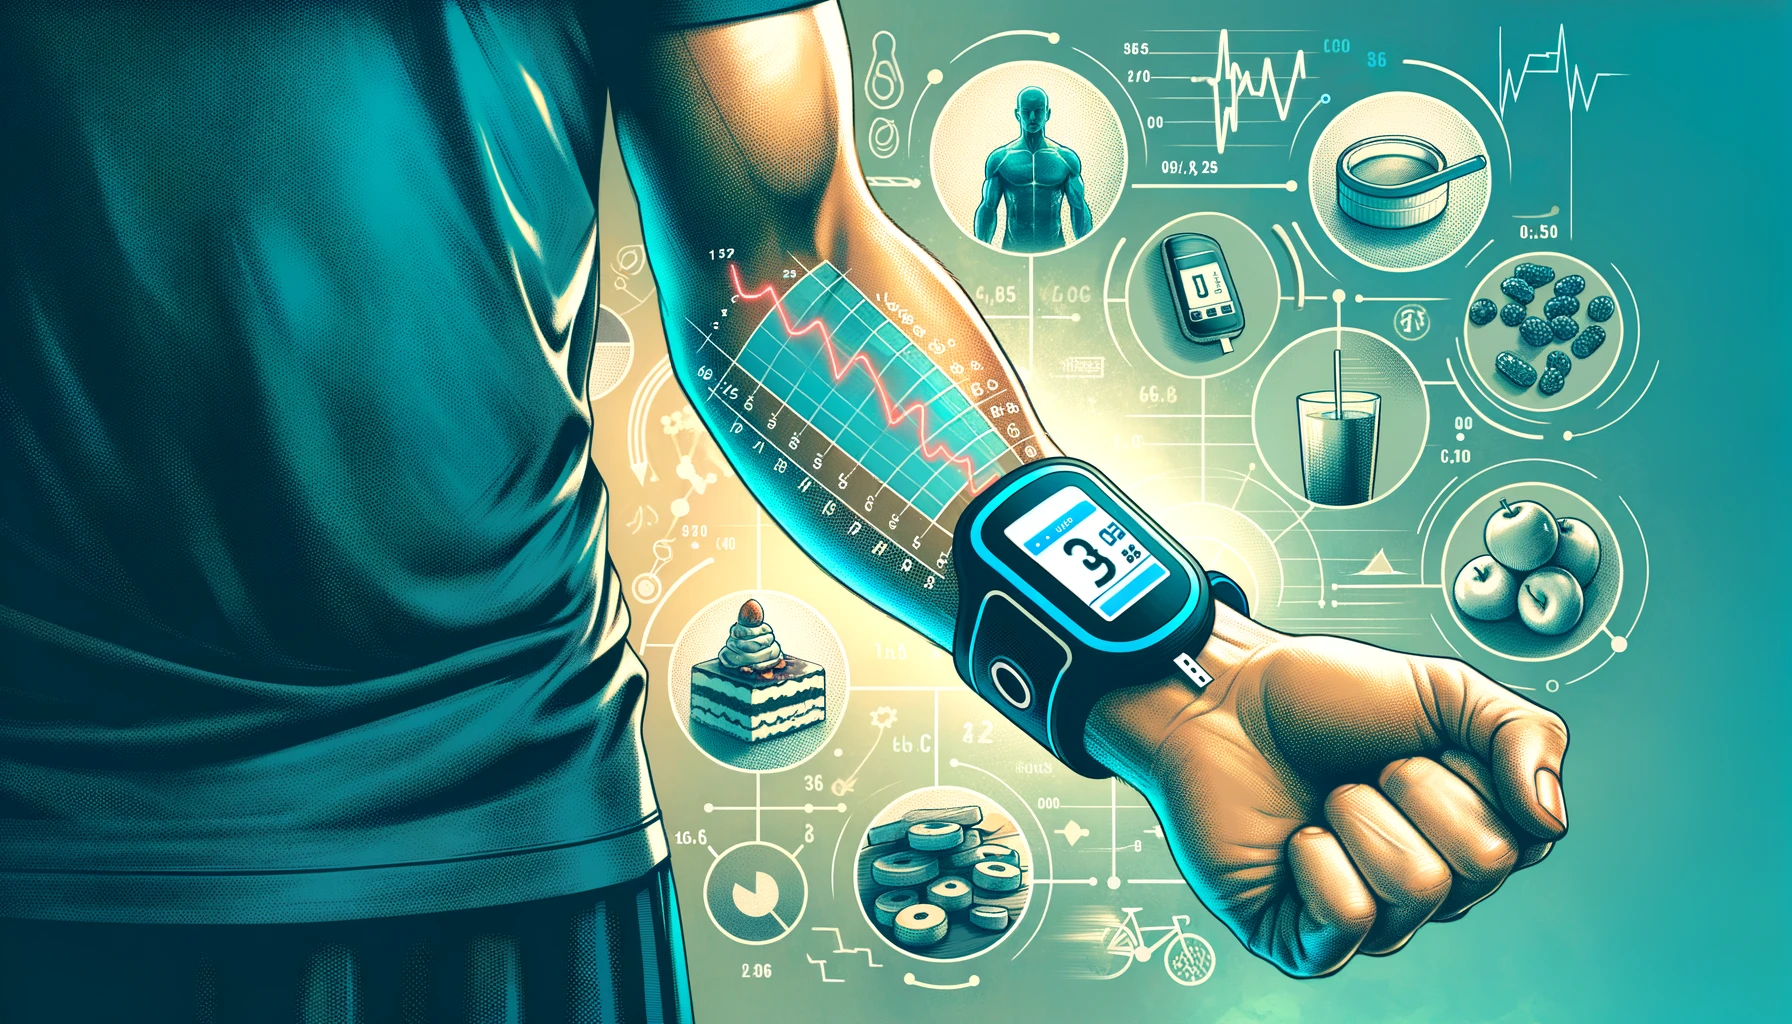  Illustration of an athletic arm with a CGM sensor and faded graphics of sports activities and carbohydrate-rich foods.